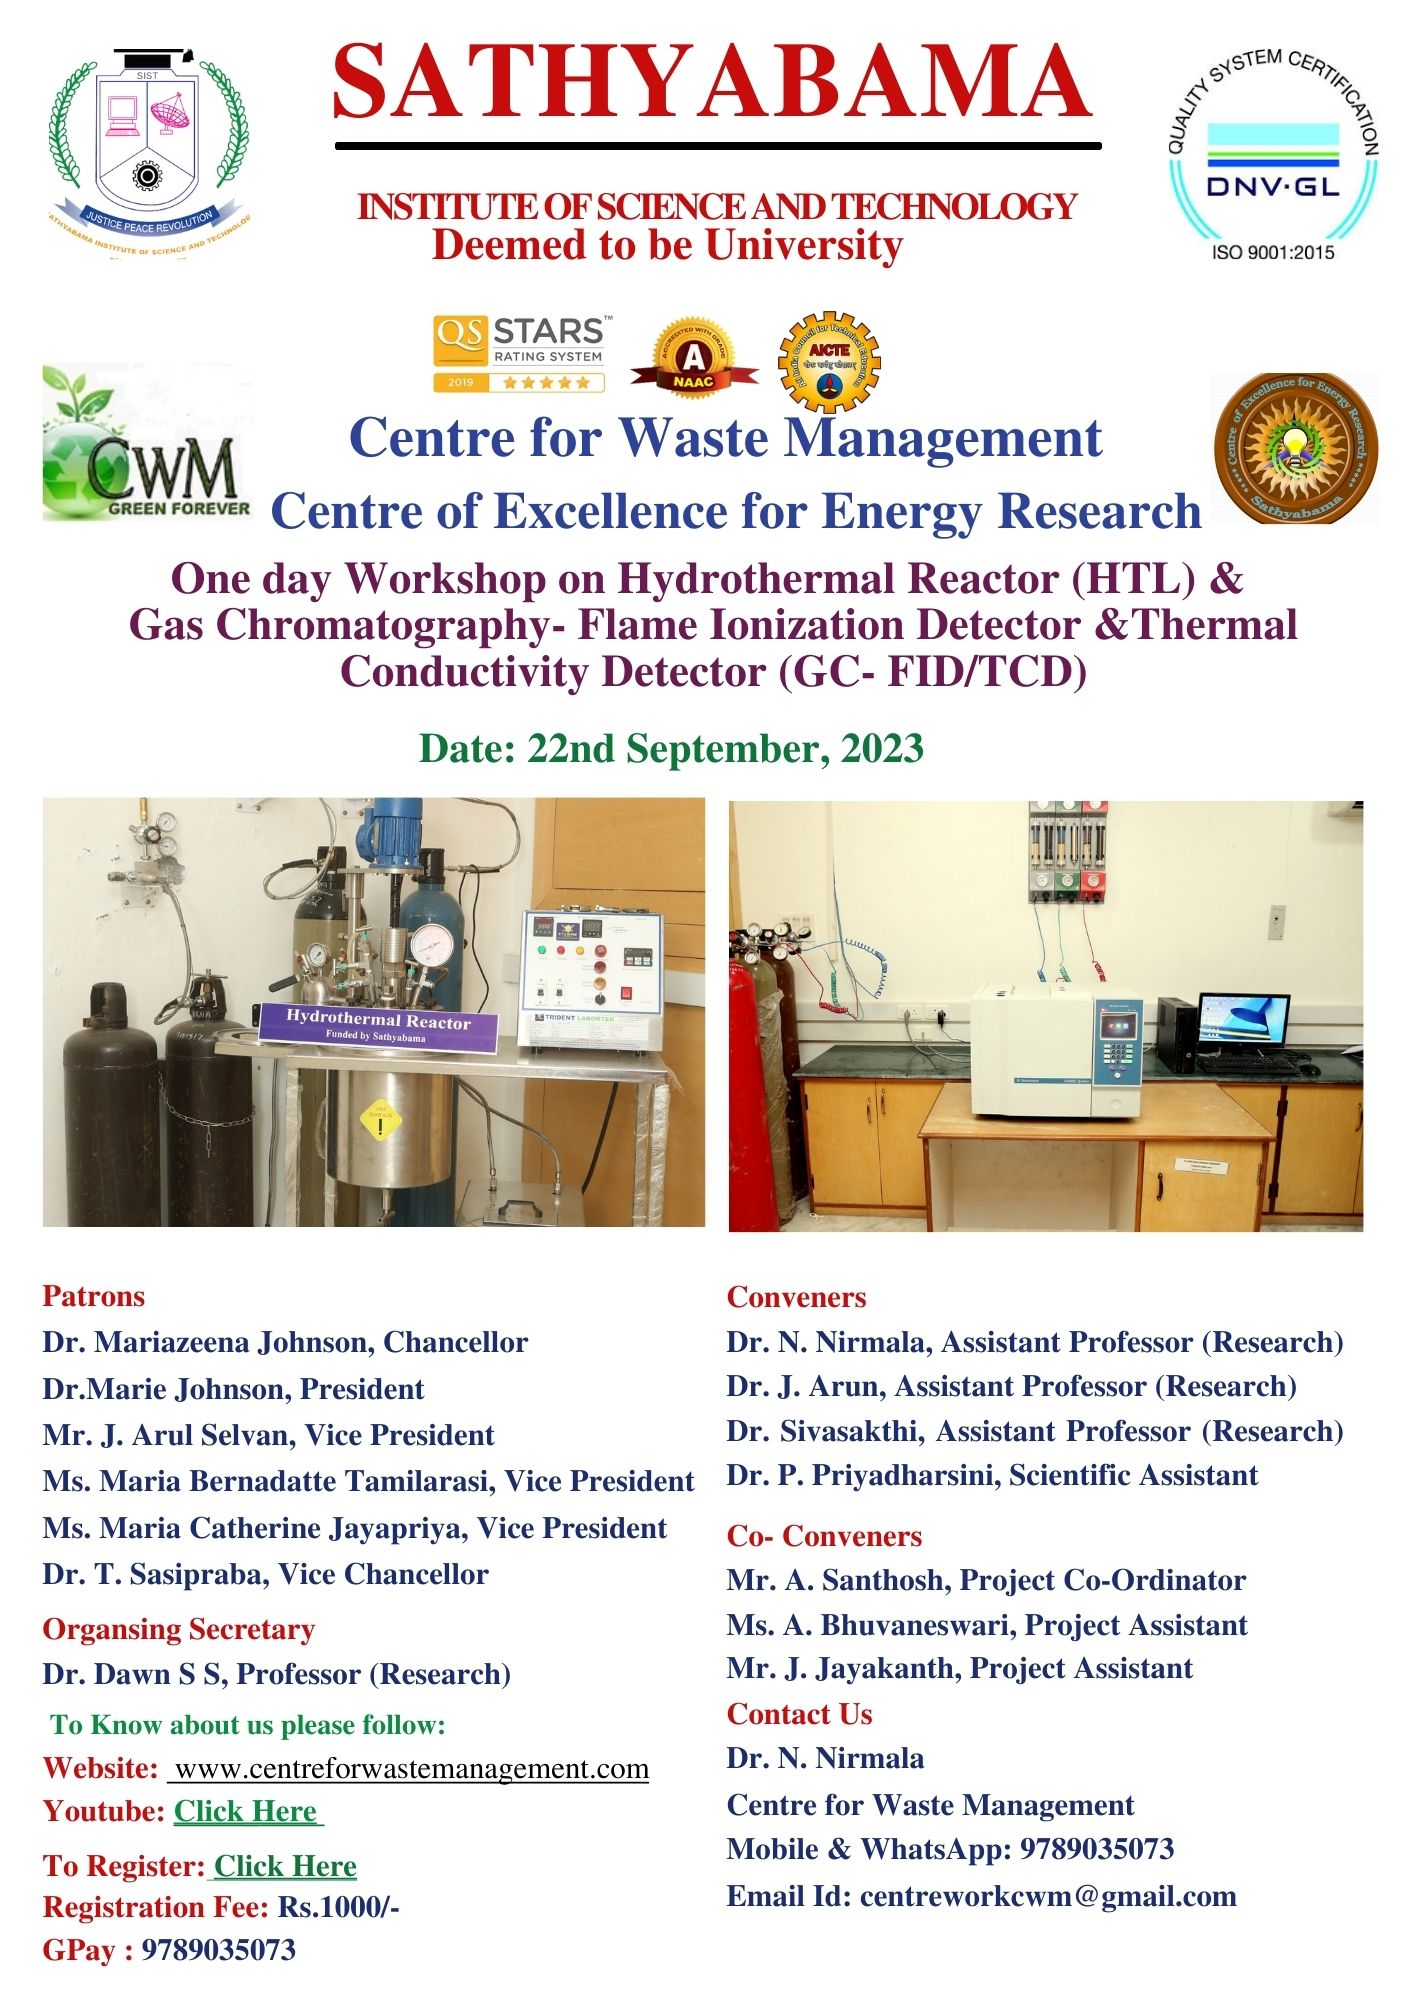 One day Workshop on Hydrothermal Reactor (HTL) & Gas Chromatography- Flame Ionization Detector &Thermal Conductivity Detector (GC- FID/TCD)